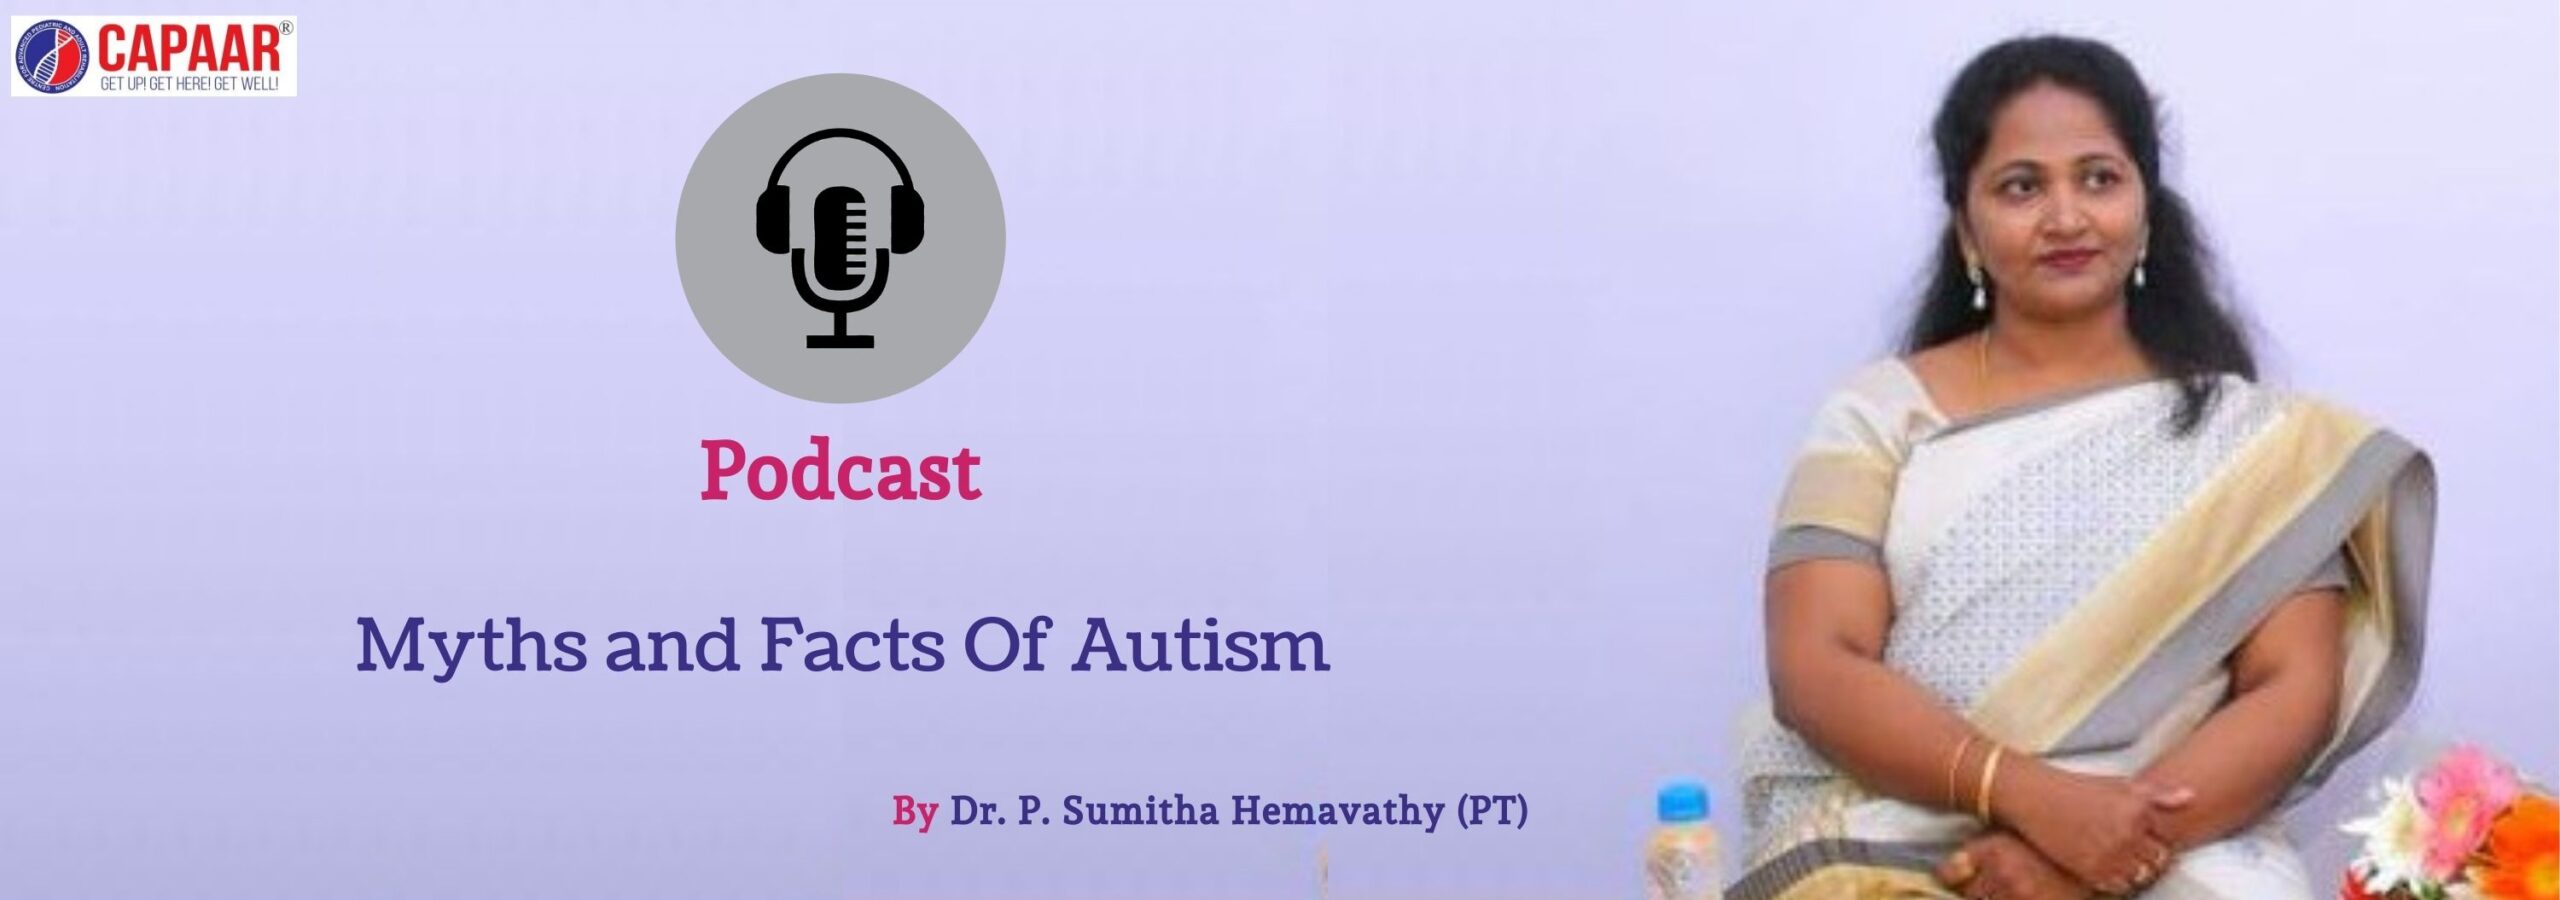 Podcast On Myths and Facts of Autism - Best Autism Centre in Bangalore - CAPAAR